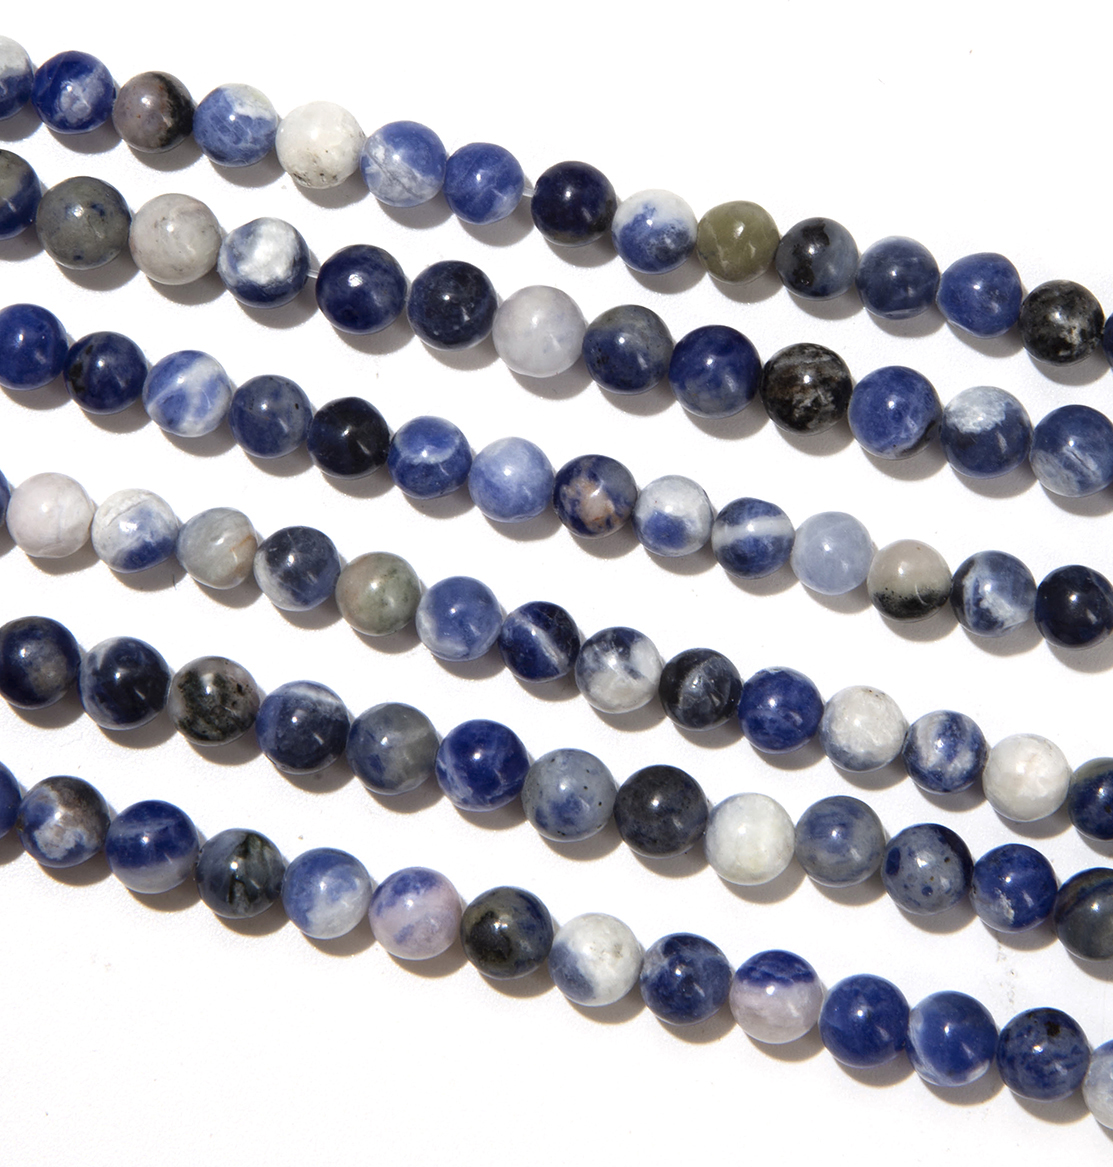 Sodalite A 6mm pearls on string